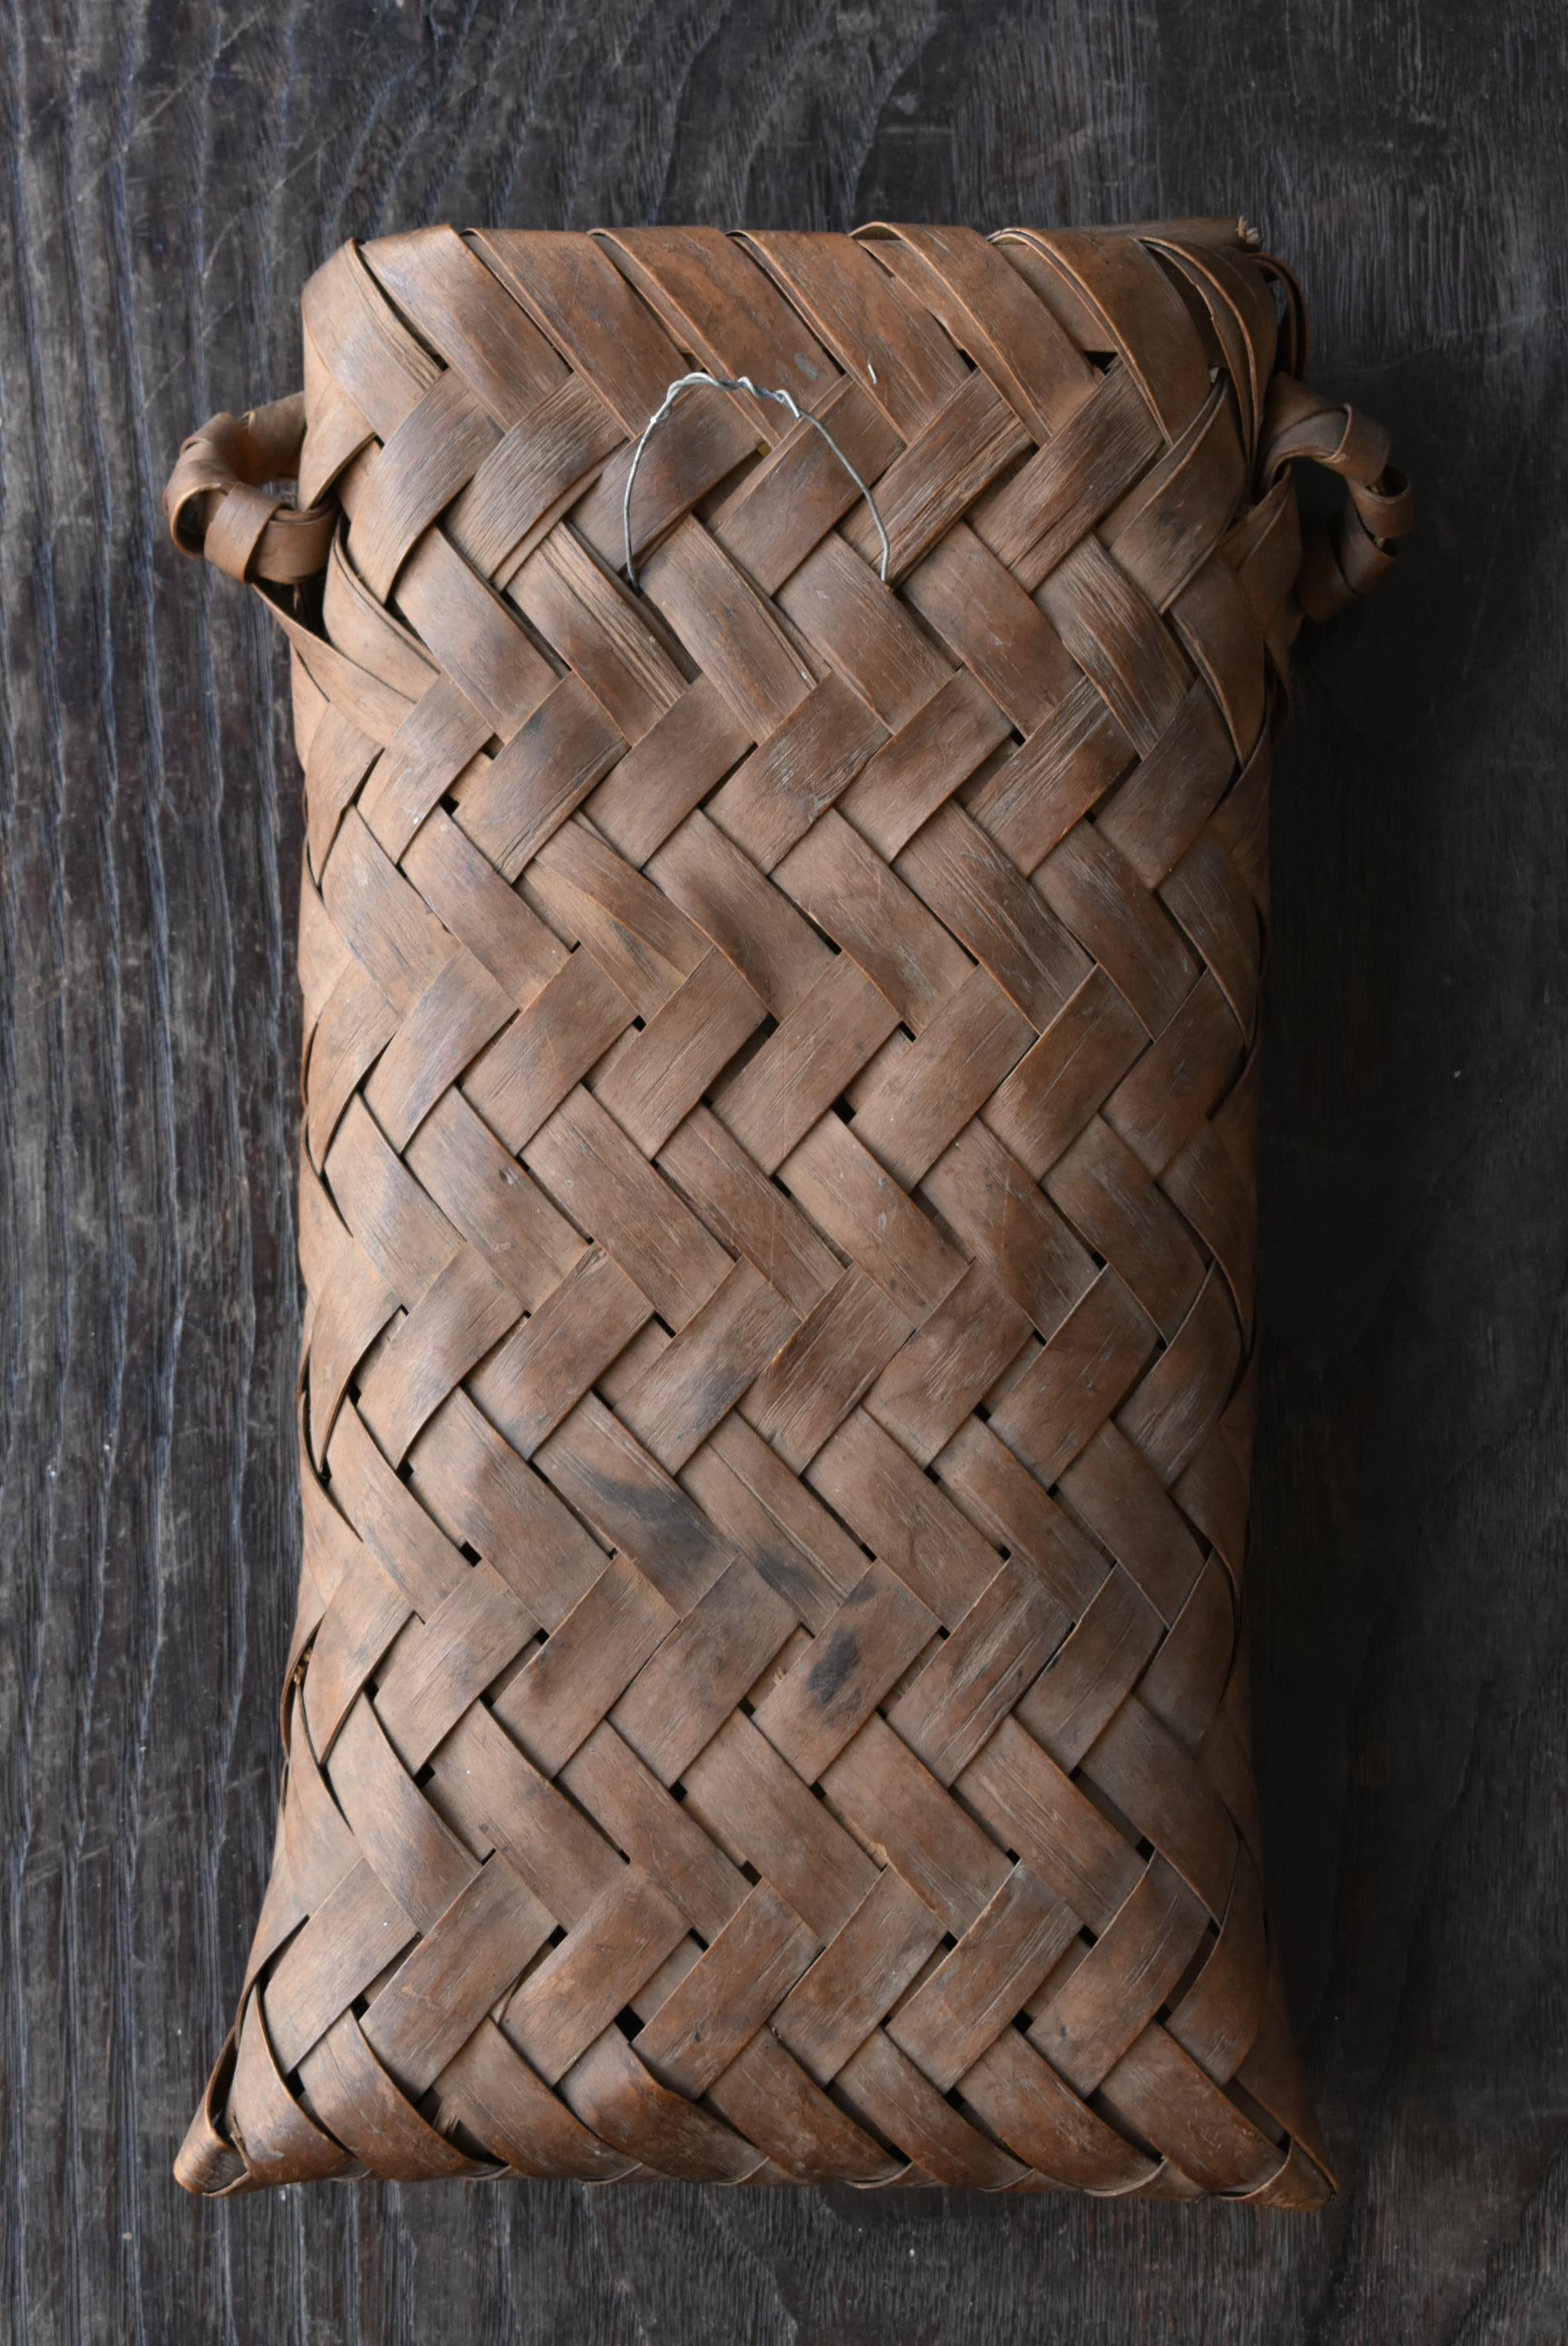 Other Japanese Antique Wall Hanging Vase Woven with Plant Skins / Wabi Sabi Decoration